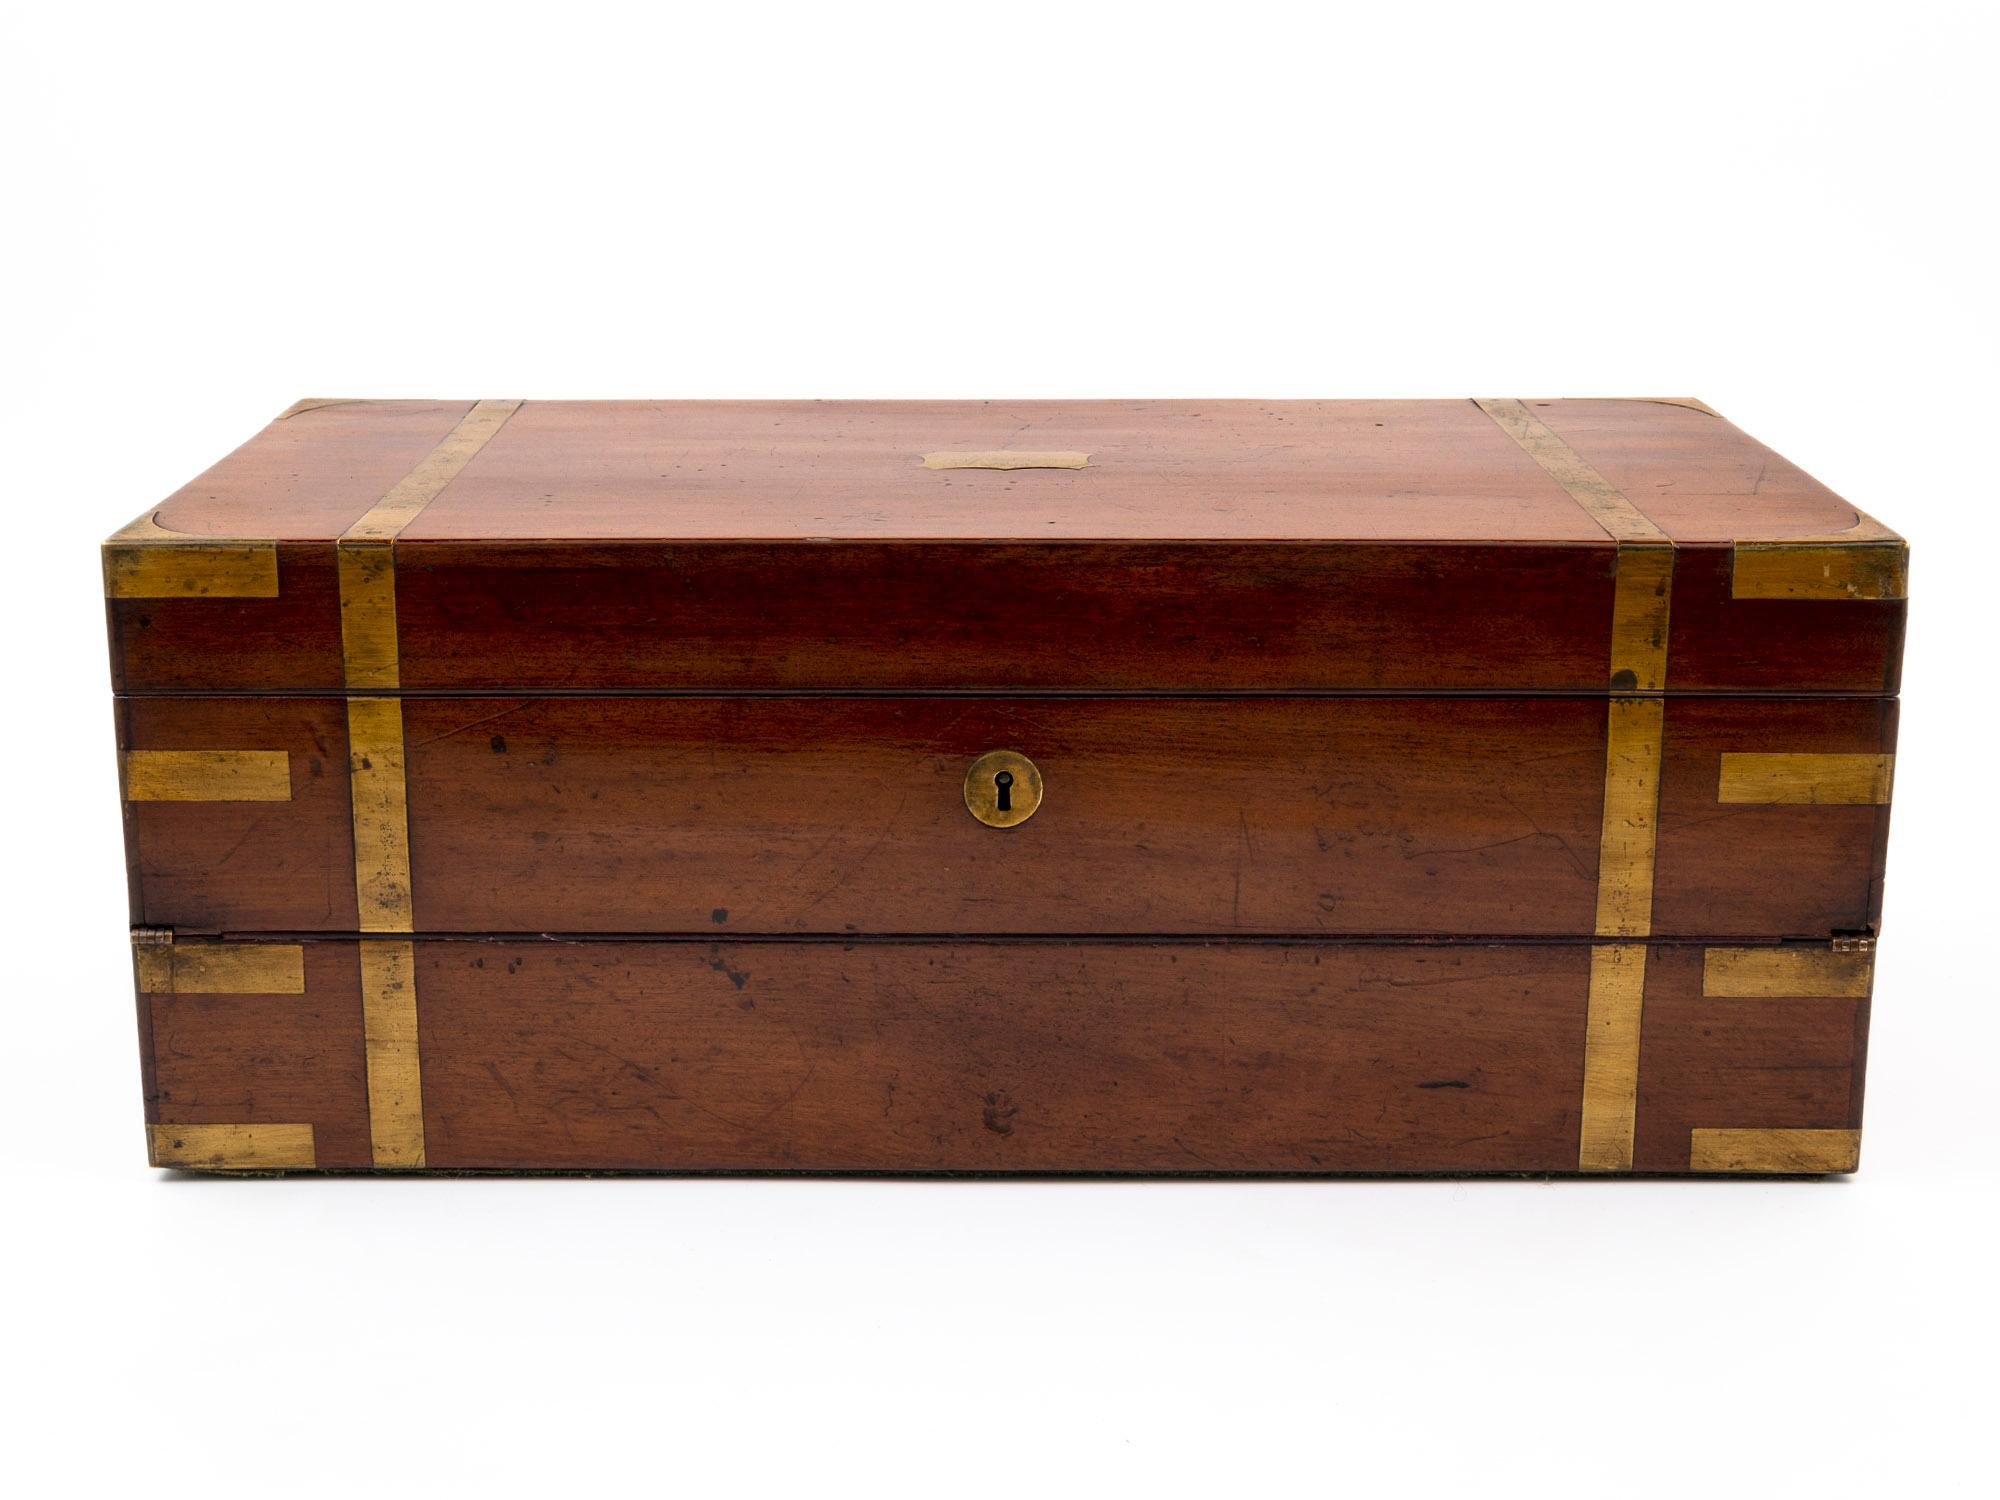 A large military-style solid Mahogany double opening writing box, with brass corner brackets, strapping and flush fitting campaign-style side handles. Contains a secret compartment with three hidden drawers. Lifting the lid reveals a maroon